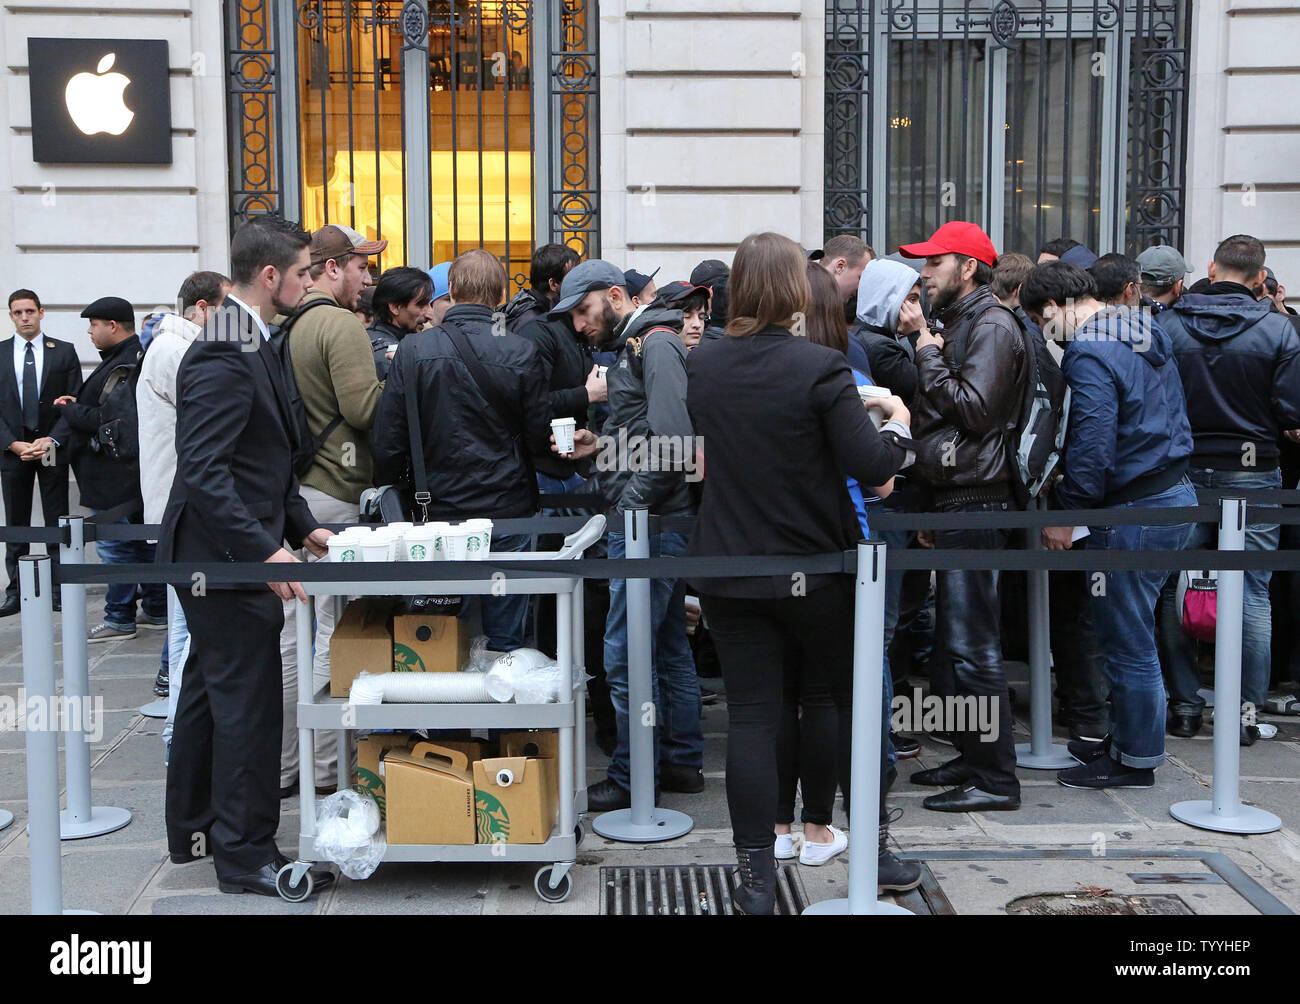 Apple employees serve coffee to customers as the line up in front of the Apple Store near Place de l'Opera before the launch of the new iPhone5s and iPhone5c today in Paris on September 20, 2013.  The iPhone 5s features a new Touch ID fingerprint sensor on the home button that allows users to unlock their phone without using a password while the iPhone 5c offers users a choice of various colors.   UPI/David Silpa Stock Photo